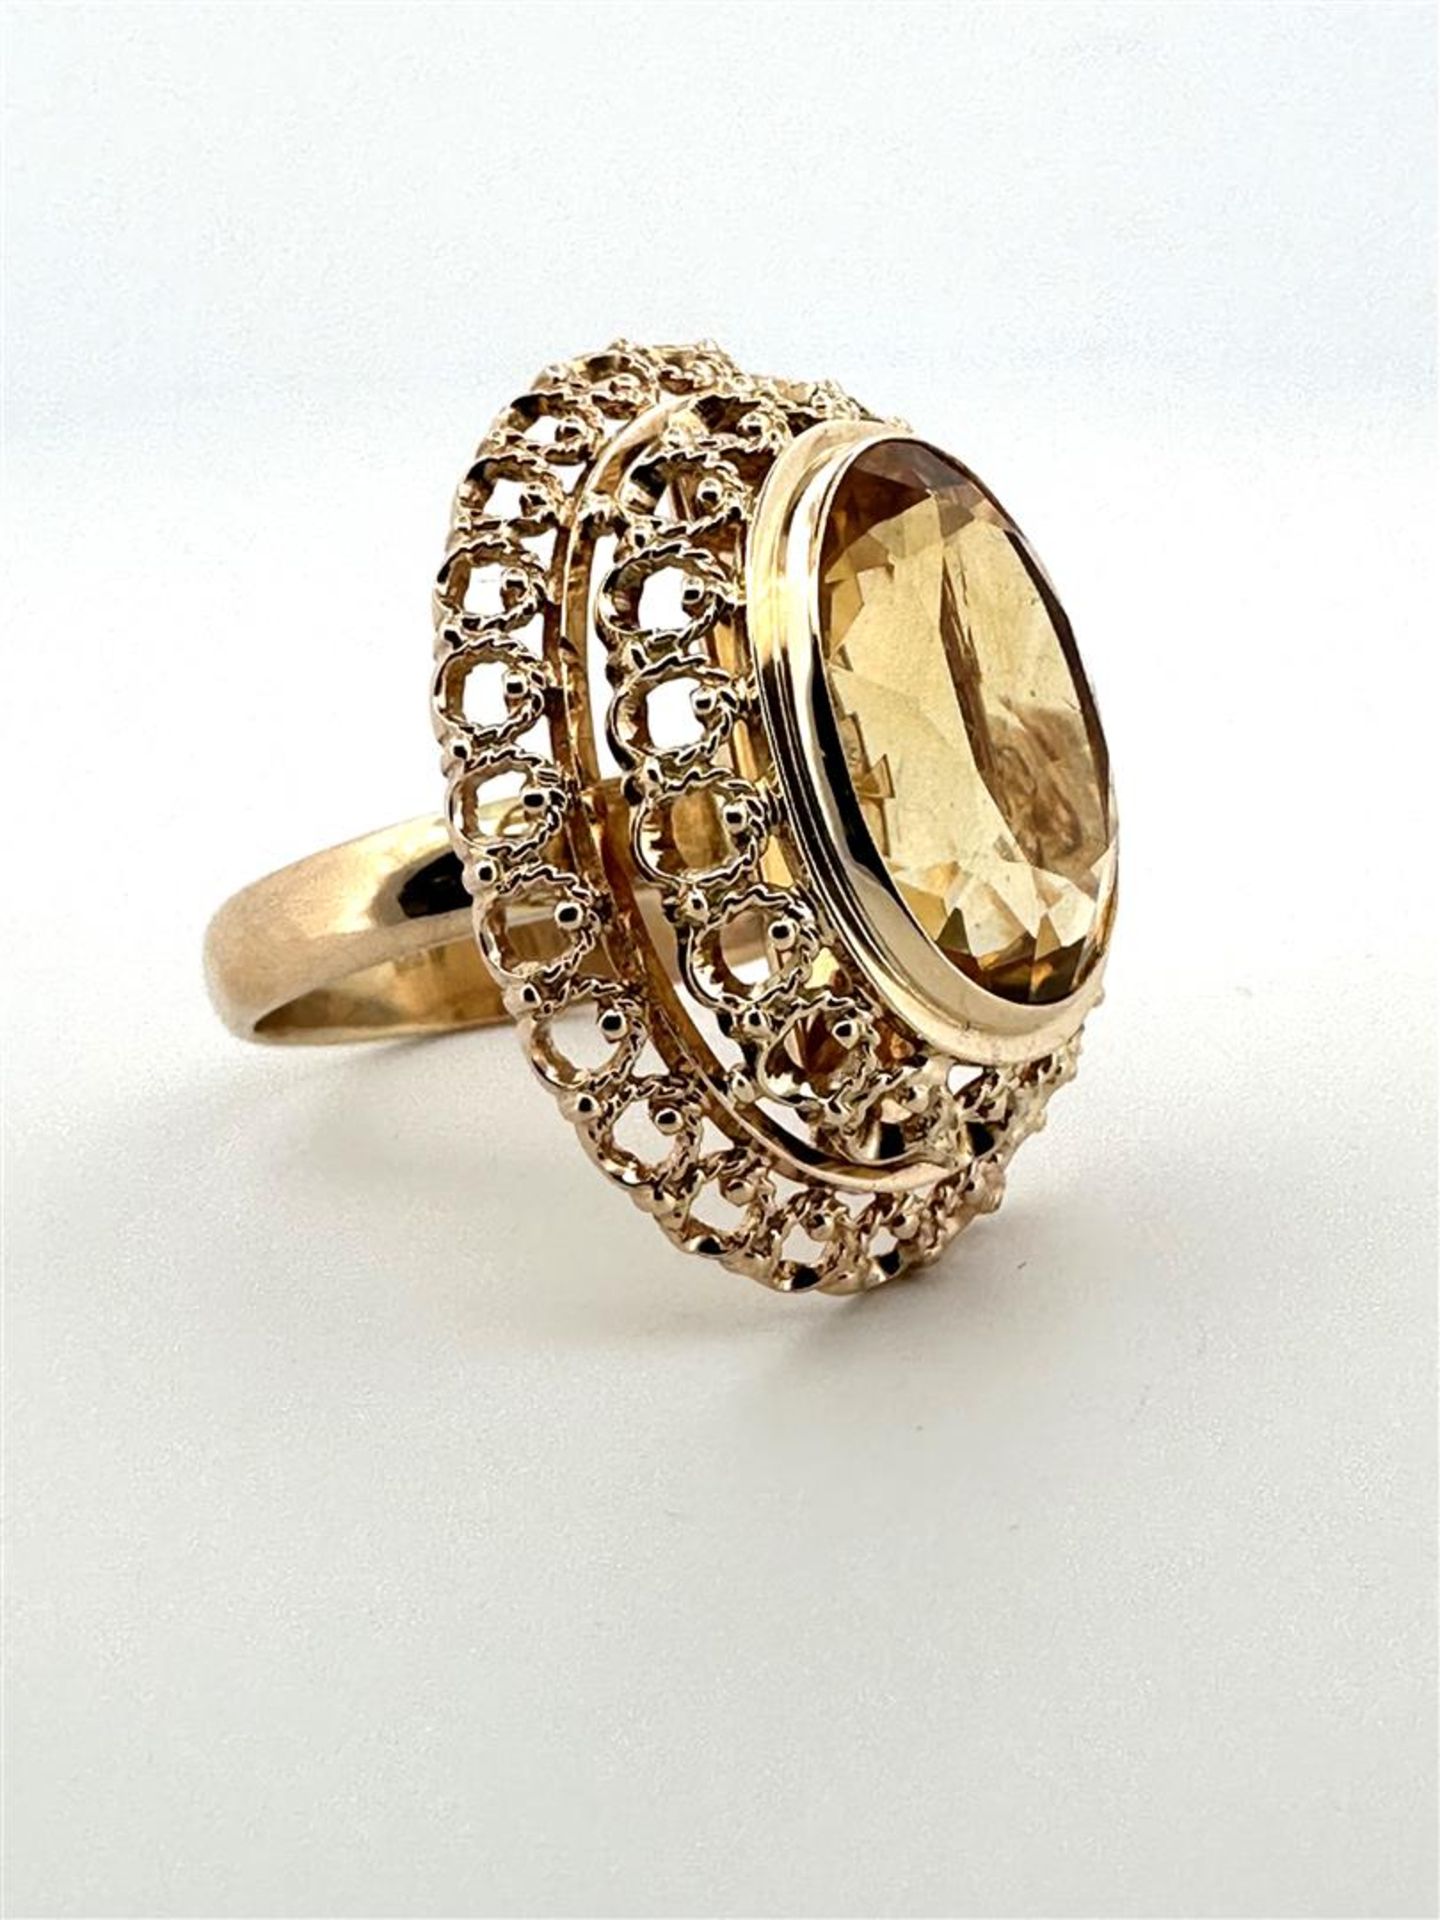 14kt yellow gold statement cocktail ring with citrine. 
The ring has a beautiful openwork double edg - Bild 5 aus 6